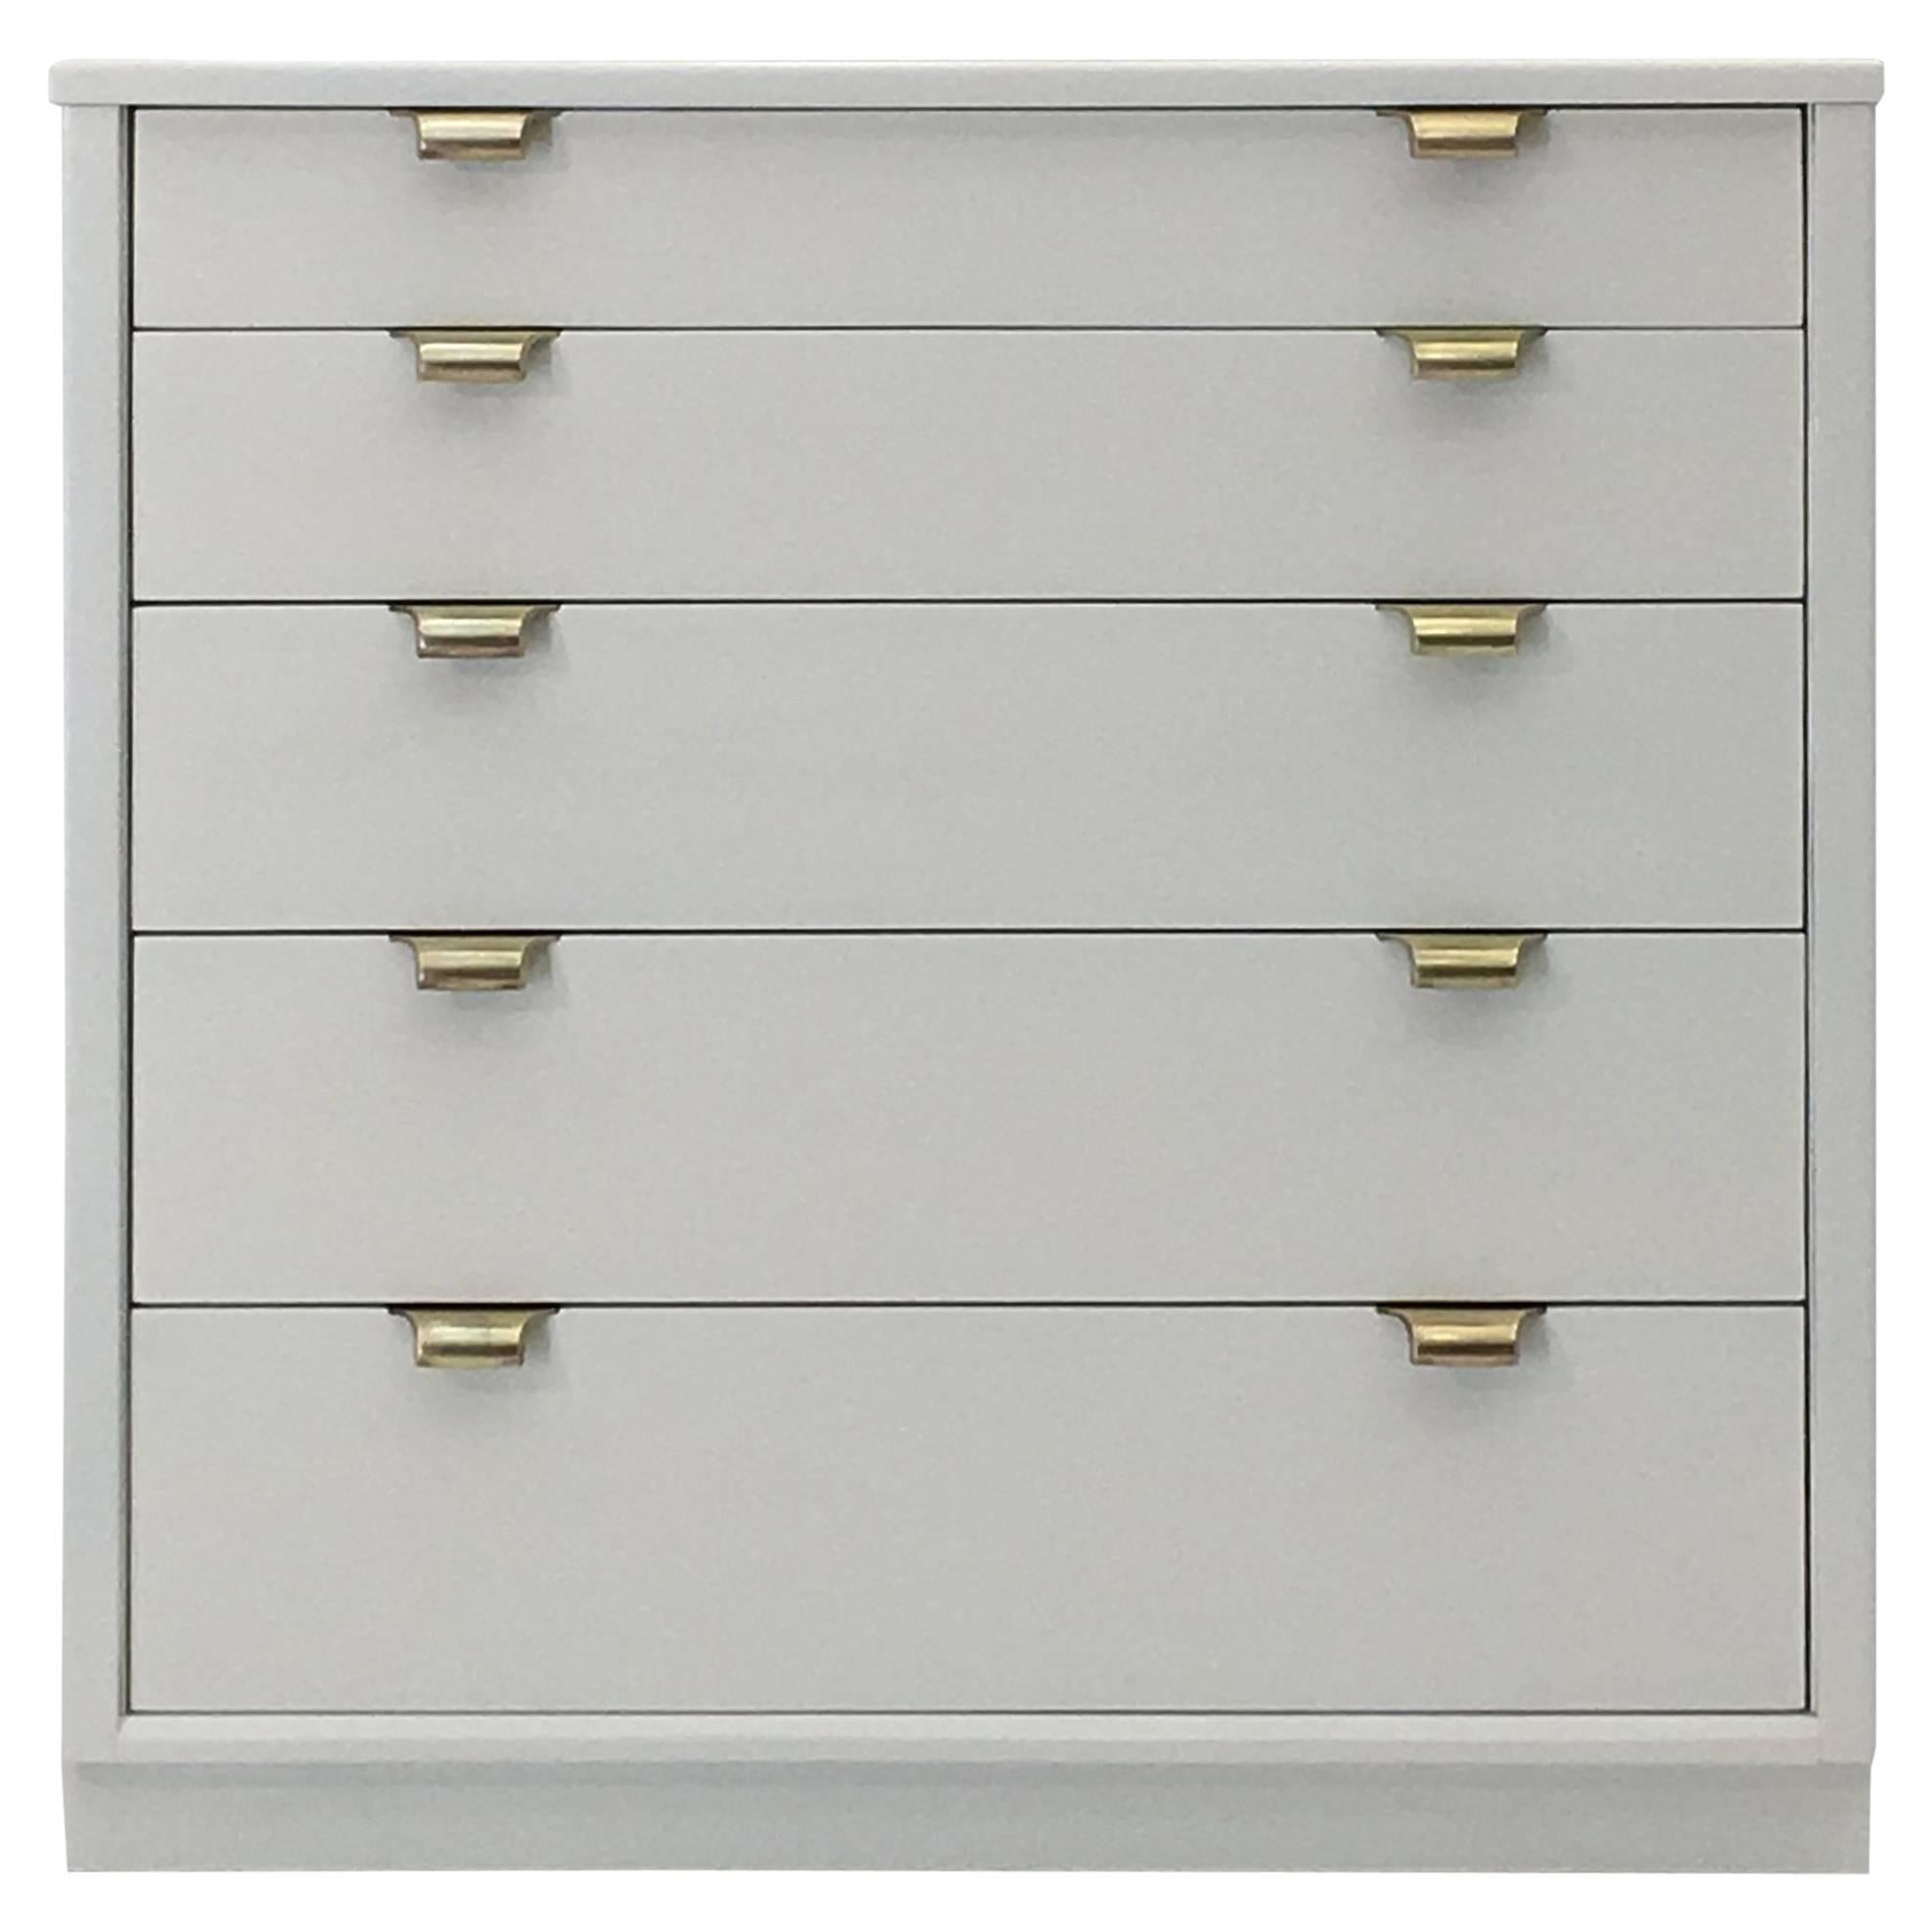 Off-White Linen Lacquered Chest by Edward Wormley